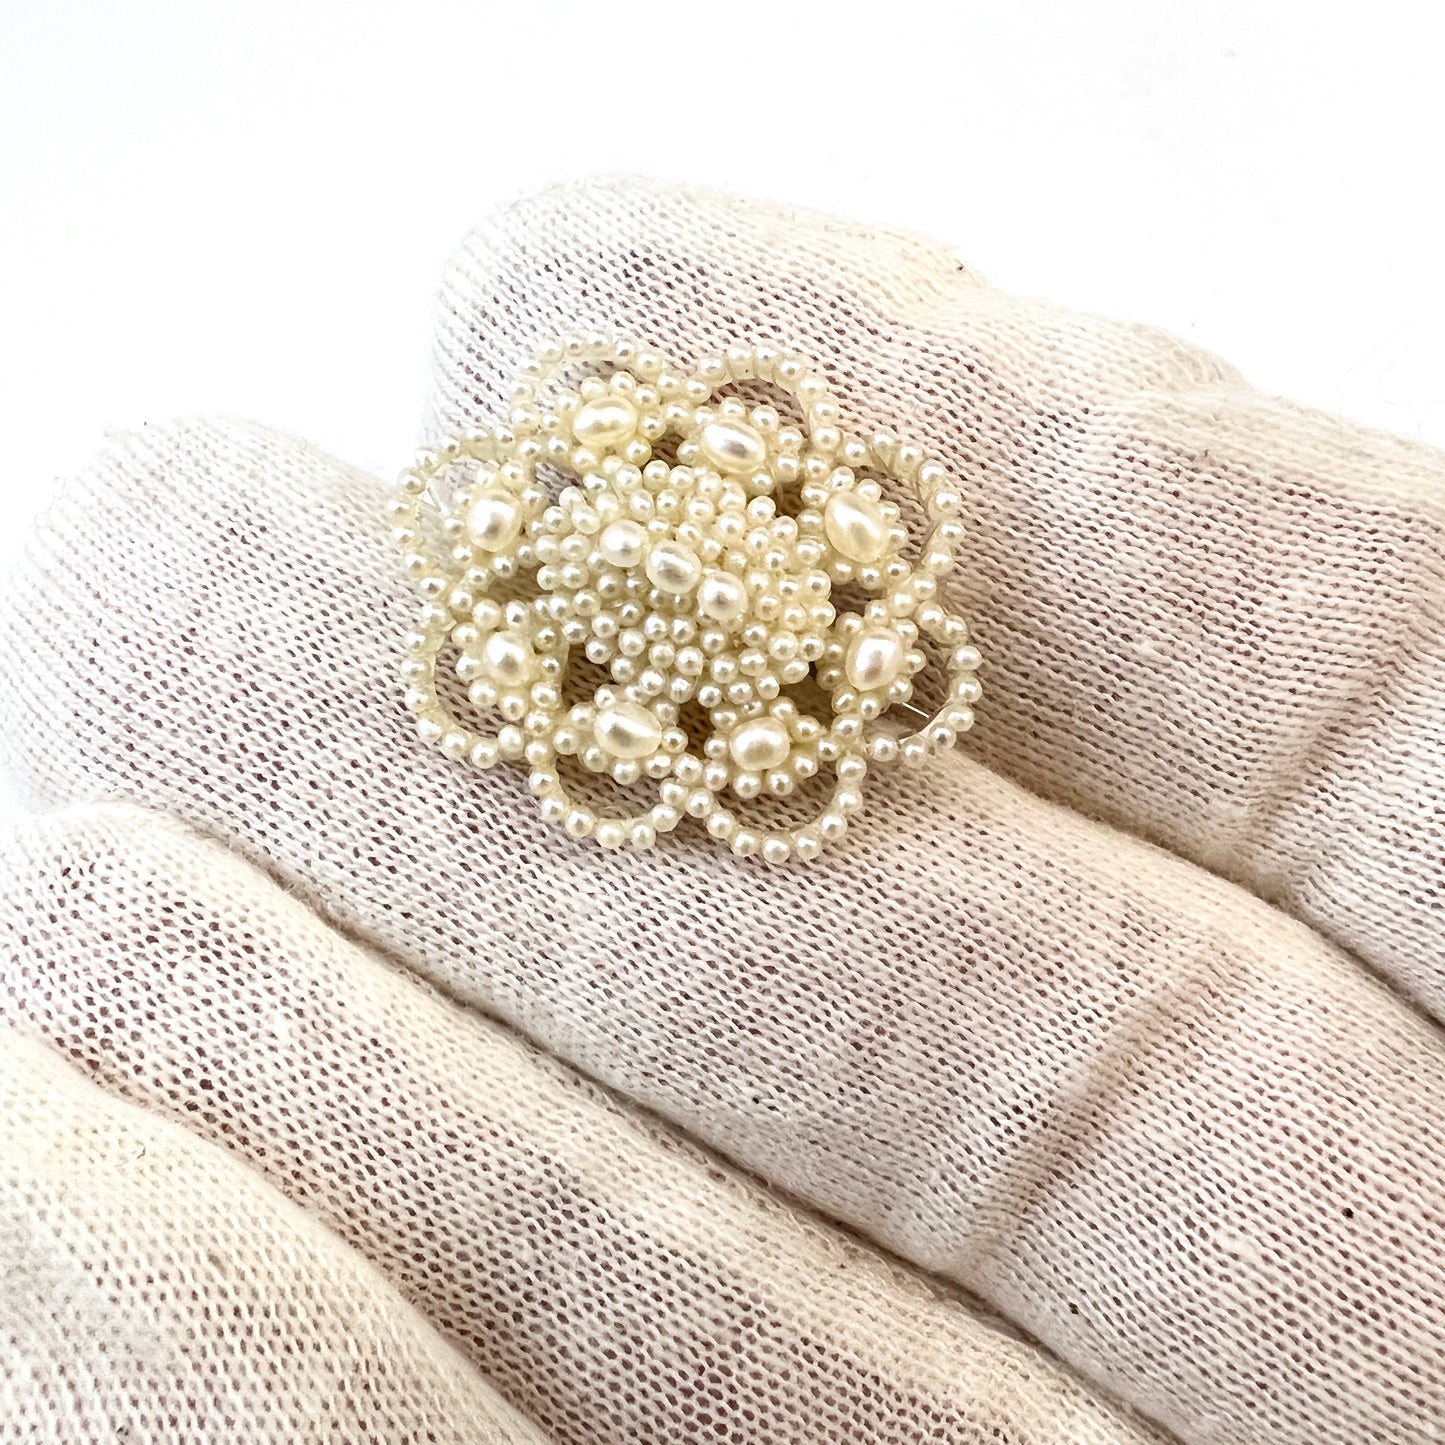 Antique Wedding Brooch. 18k Gold, Seed Pearl and Mother of Pearl.